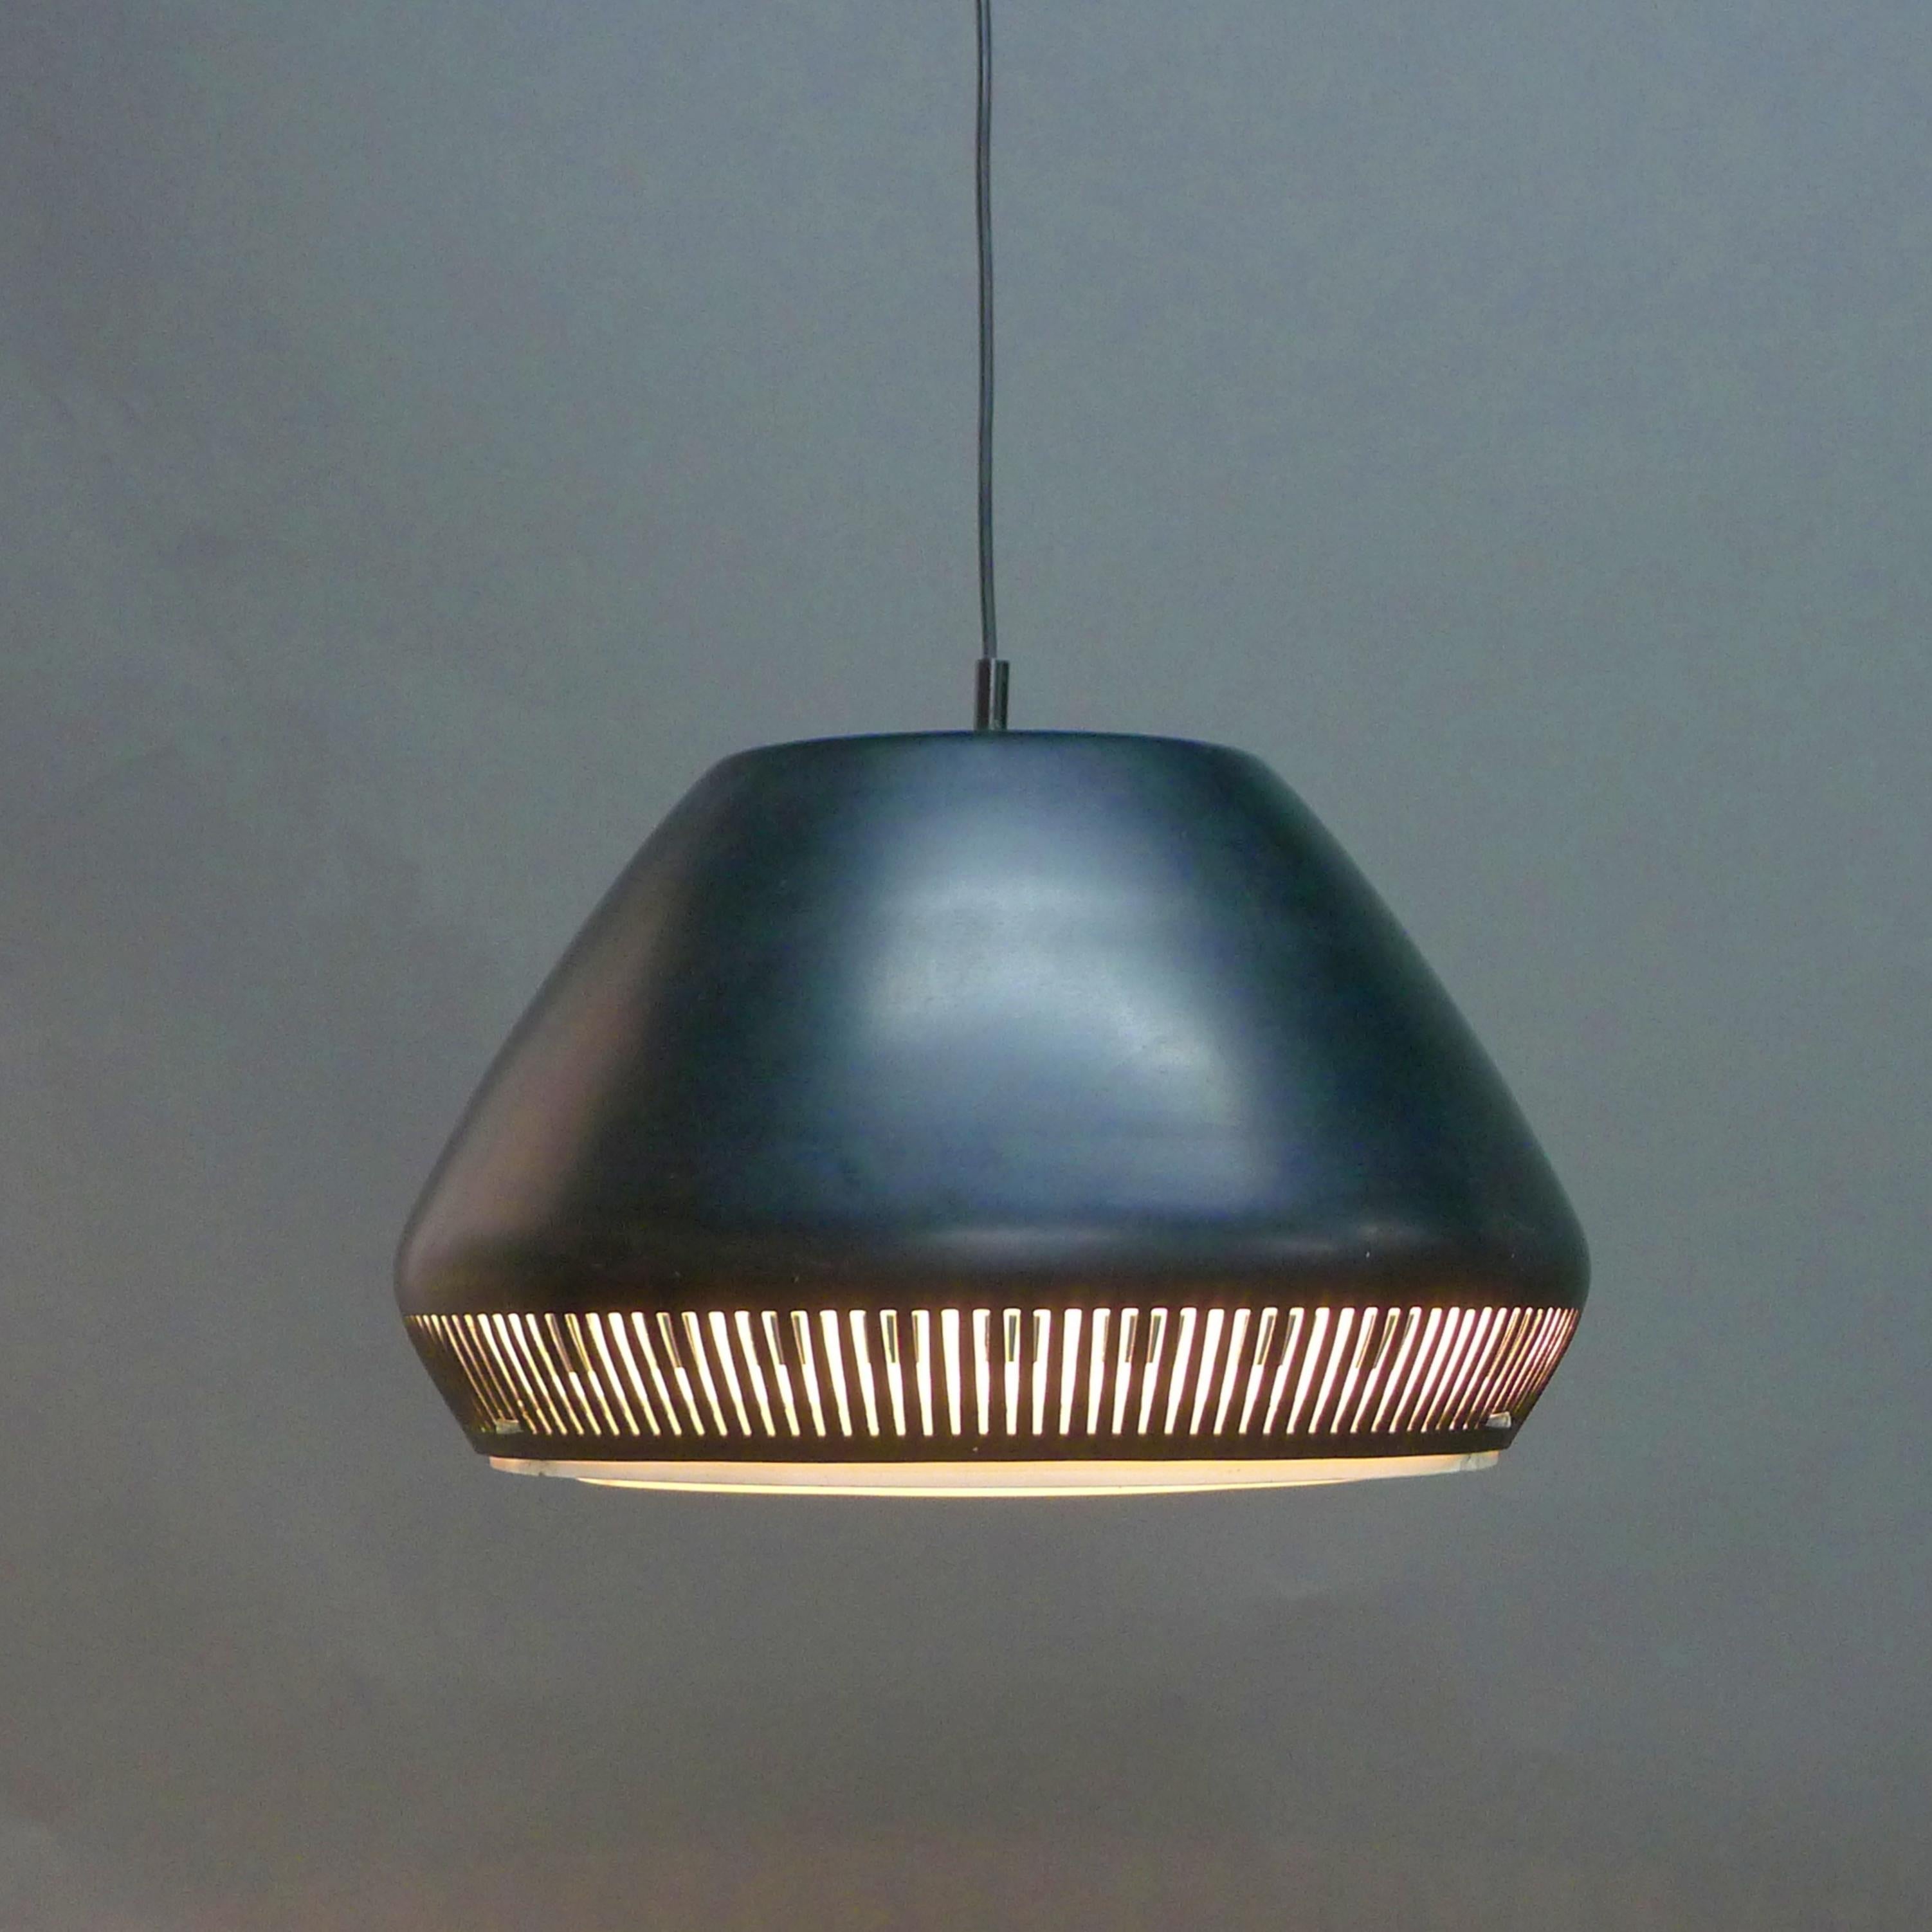 Stylish pendant light, attributed to Gio Ponti for Greco Illuminazione, Italy 1950s

Black enamelled metal curved shade with integral diffuser in concentric white enamelled metal rings which produce a beautiful lighting effect.  
The shade 50cm